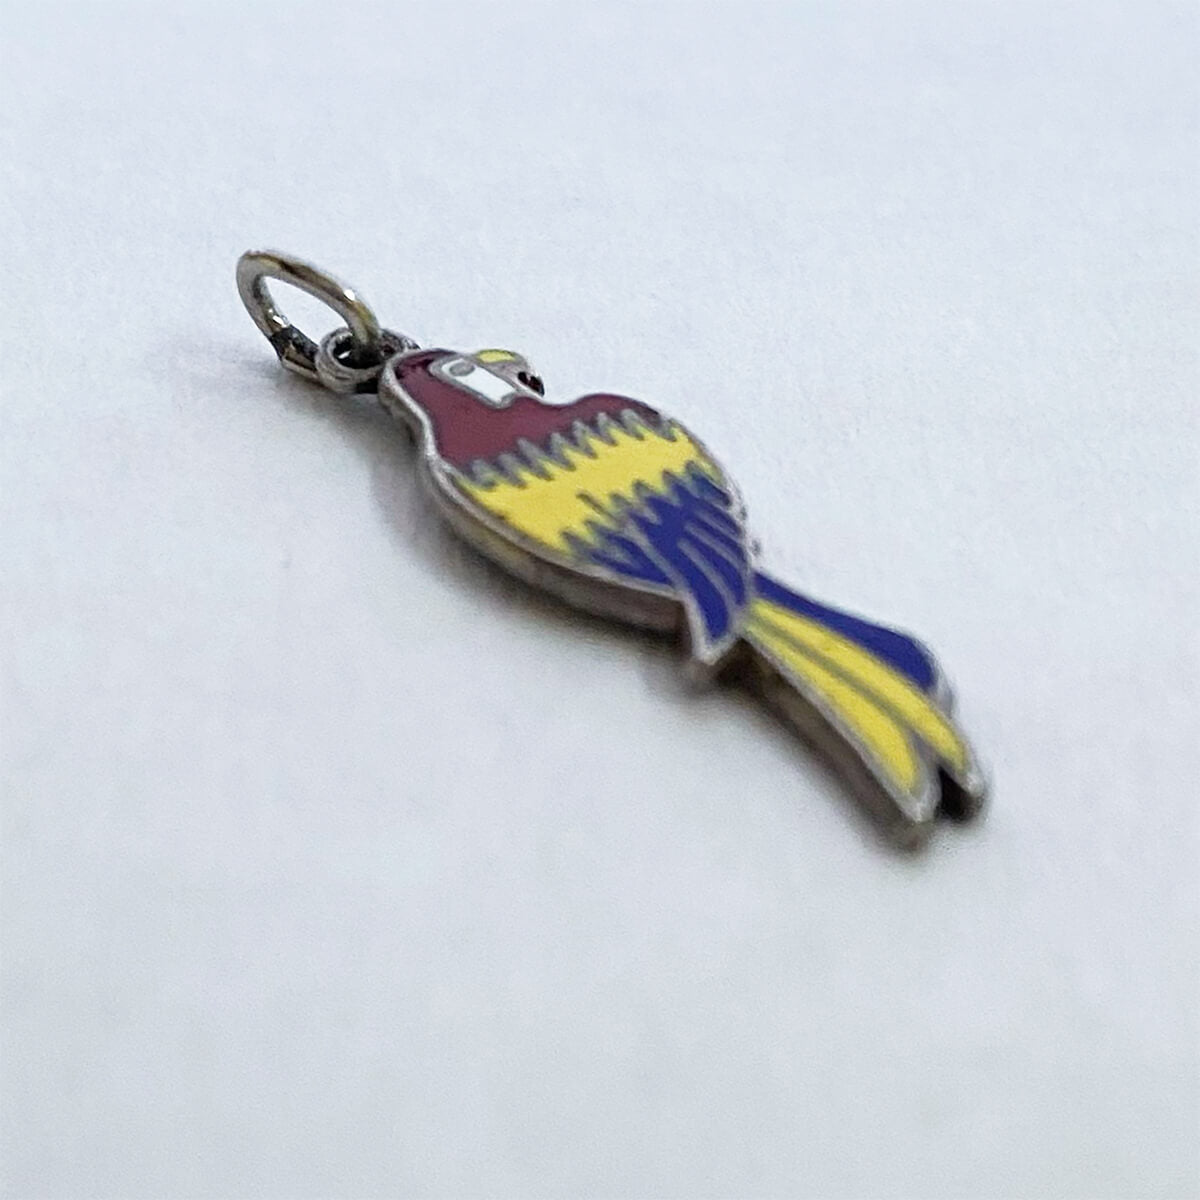 Vintage sterling silver and enamel macaw bird charm